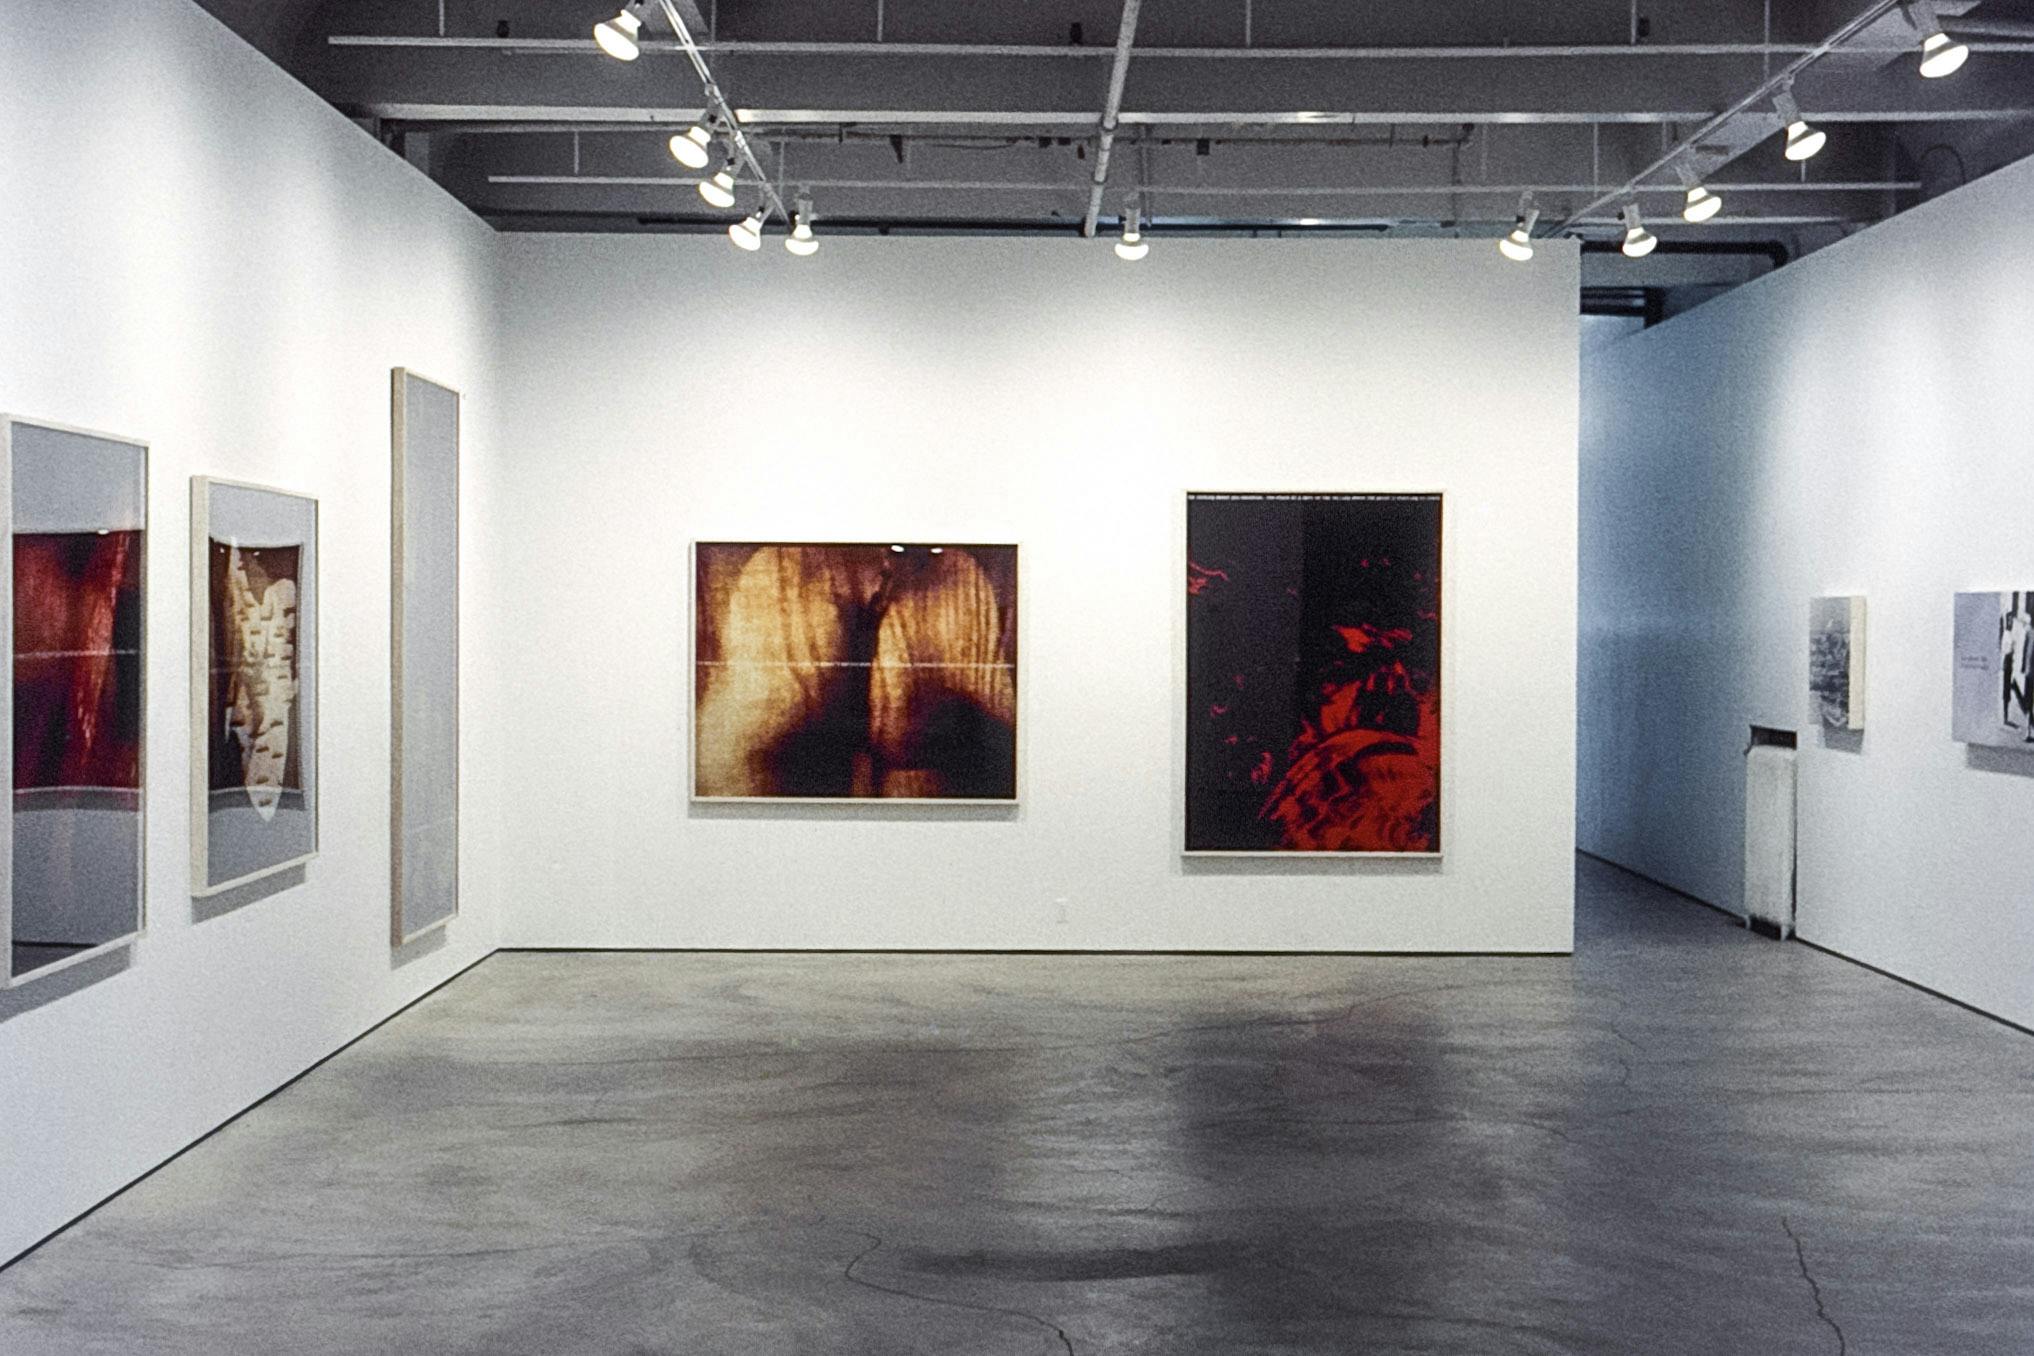 A photo of the installation view in the gallery. Seven photograph pieces are visible; five of them have dark backgrounds foregrounded by organic shapes. The rest are black and white photographs.